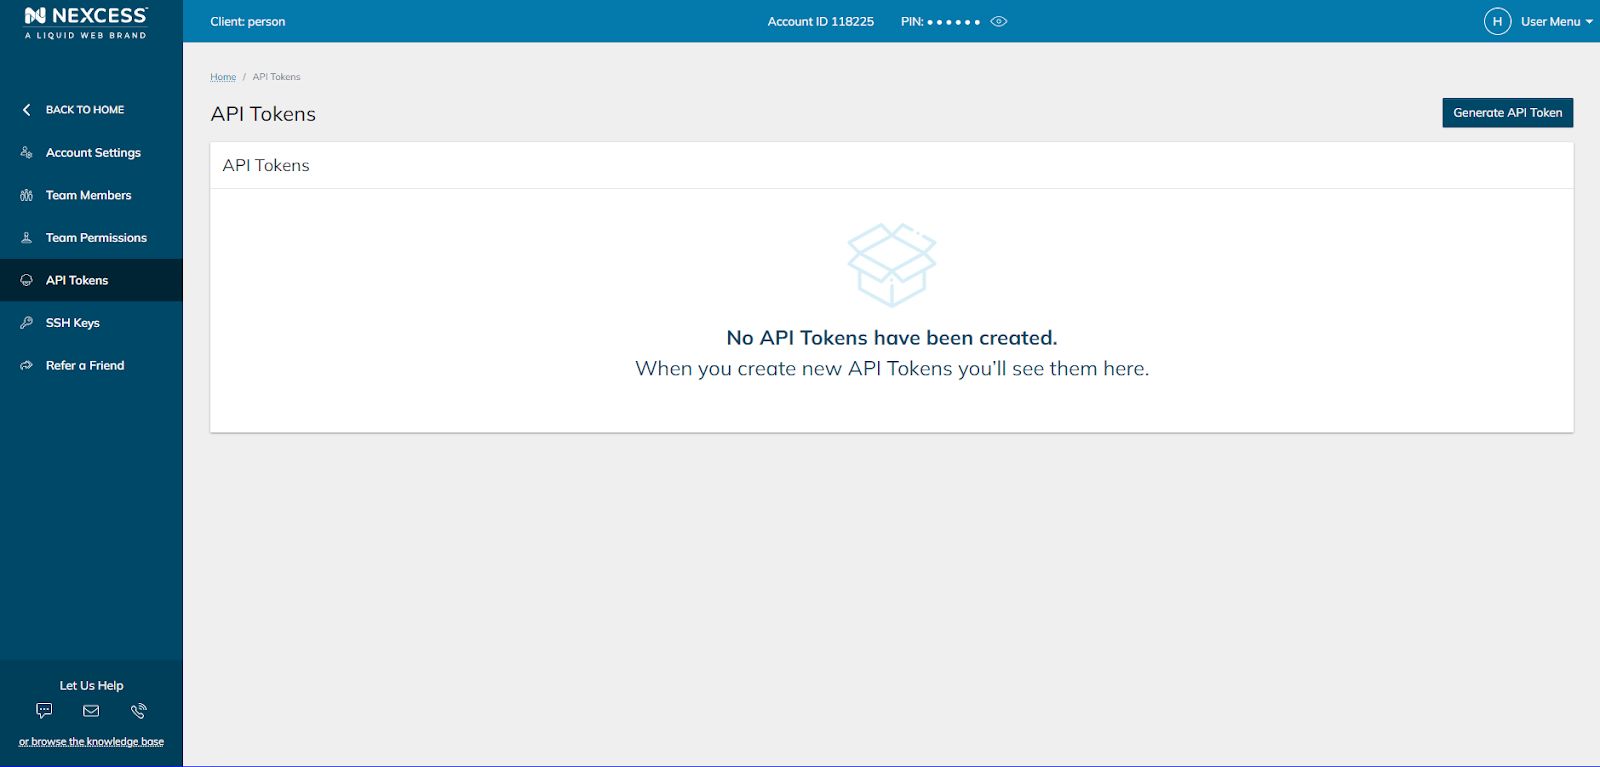 After you click on the “API tokens” button you are taken to the part of the Nexcess Client portal we are looking for.